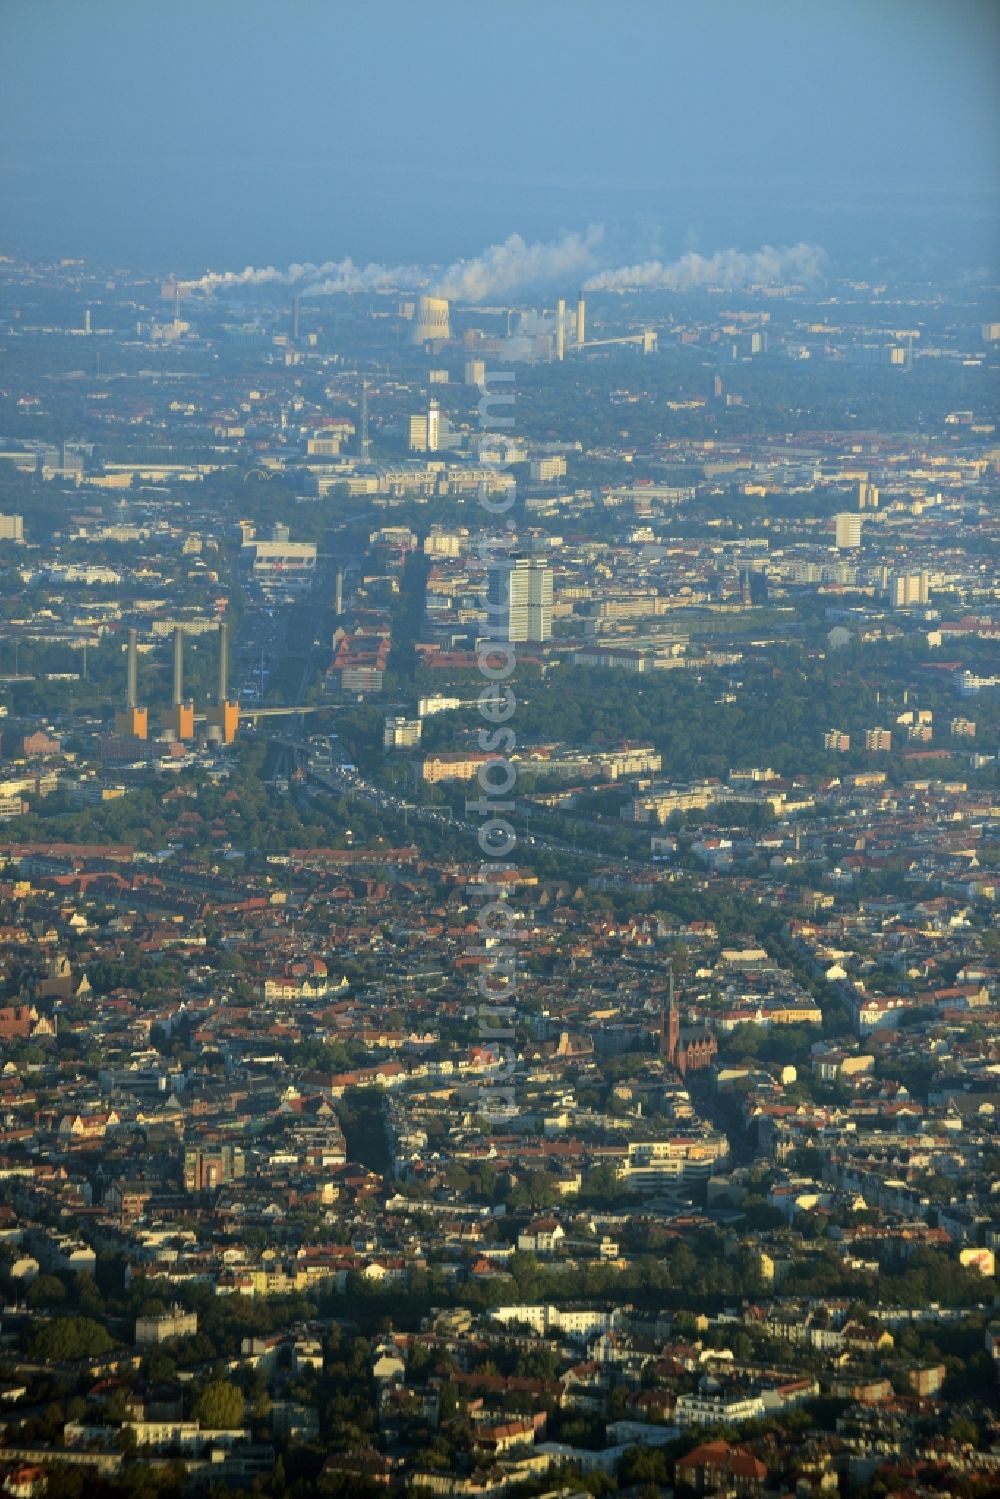 Berlin from above - View of the Friedenau, Steglitz and Wilmersdorf parts of Berlin around federal motorway A100 in Germany. View towards the Northwest of Berlin